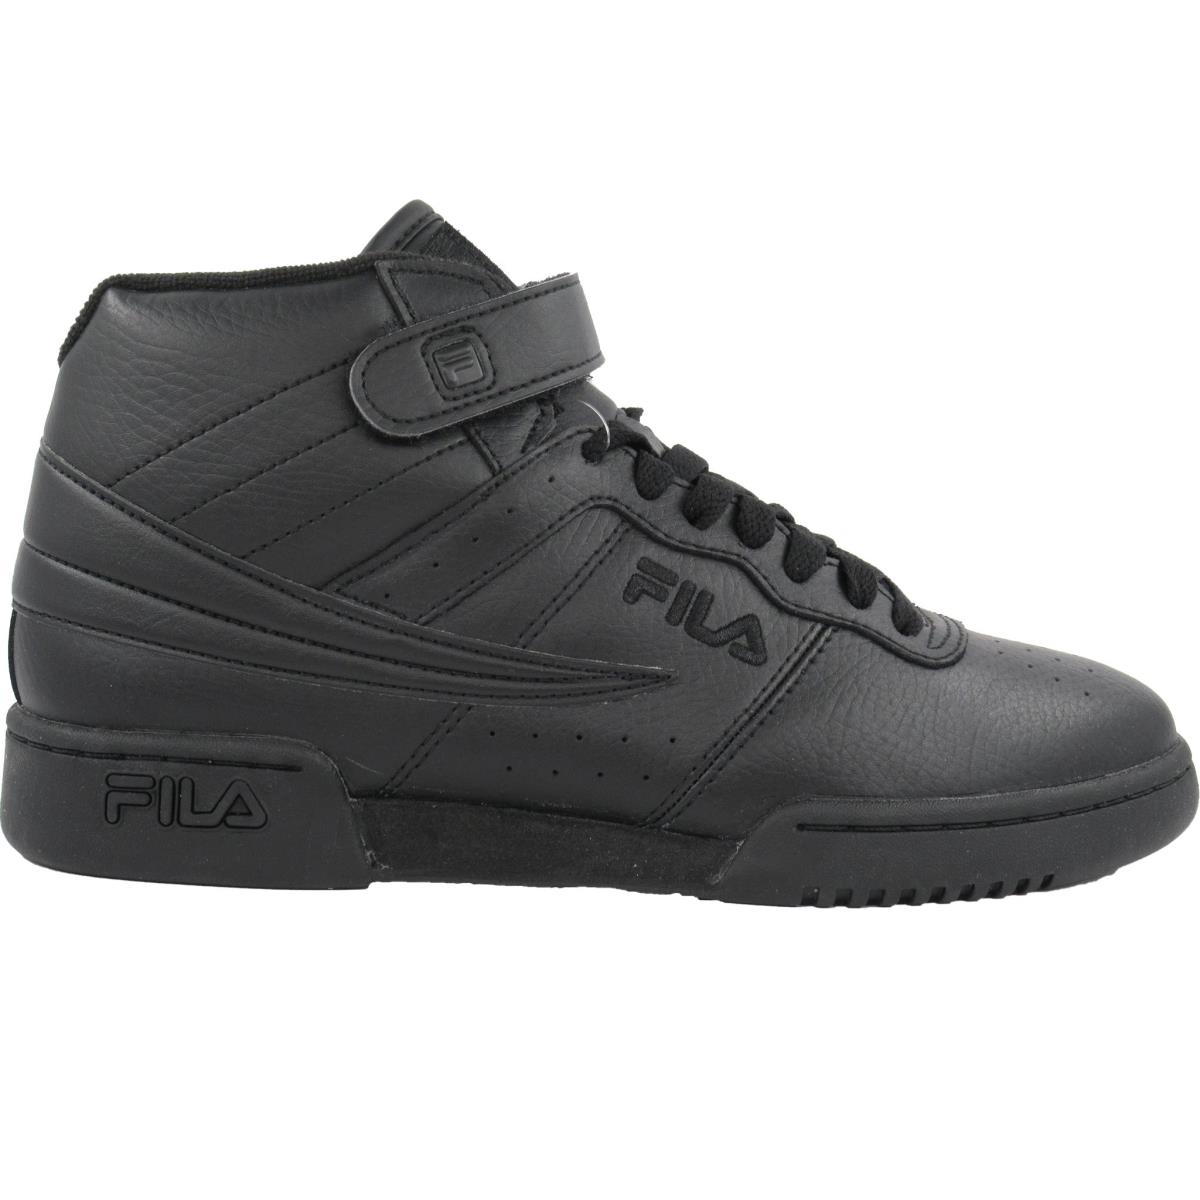 Fila Mens F13 F-13 Leather High Mid Top Casual Classic Basketball Shoes